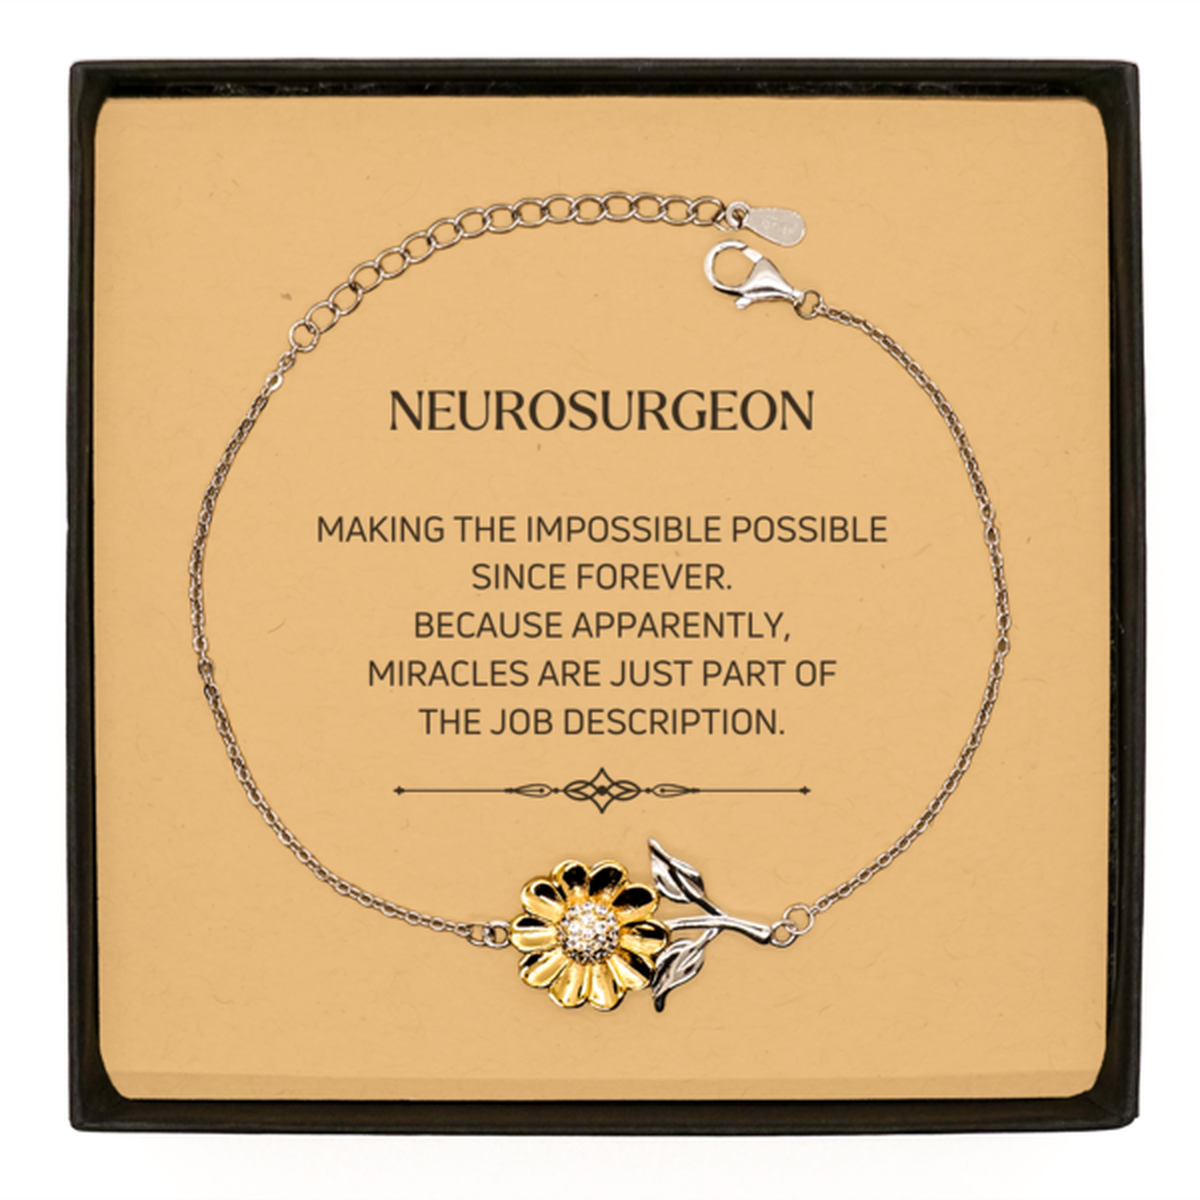 Funny Neurosurgeon Gifts, Miracles are just part of the job description, Inspirational Birthday Sunflower Bracelet For Neurosurgeon, Men, Women, Coworkers, Friends, Boss